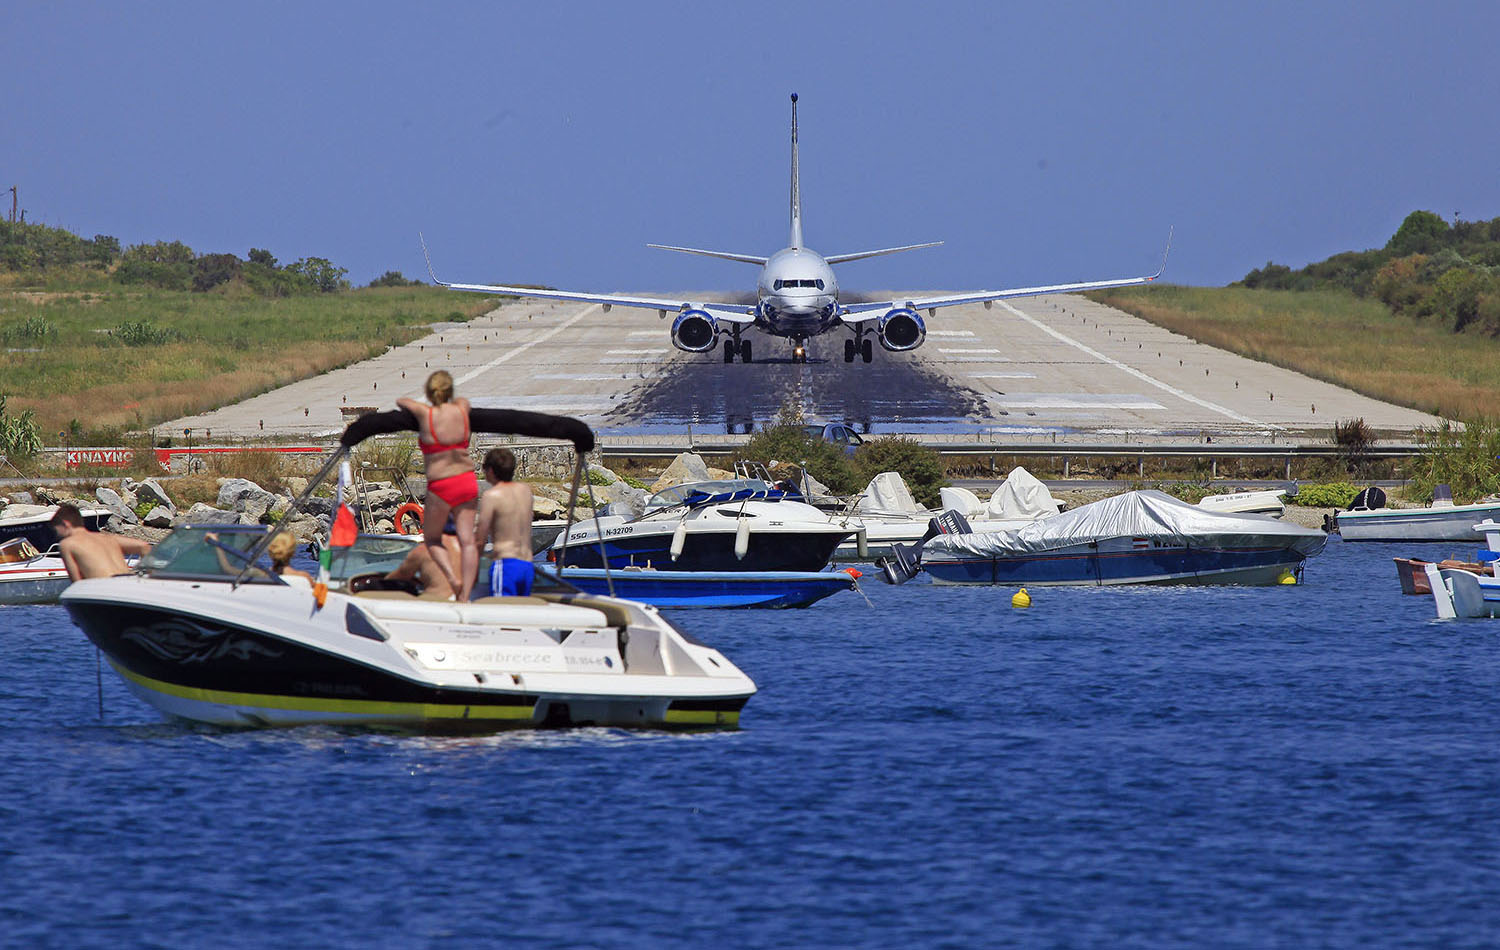 Skiathos Airport nominated for Europe’s most Scenic Airports Award 2020